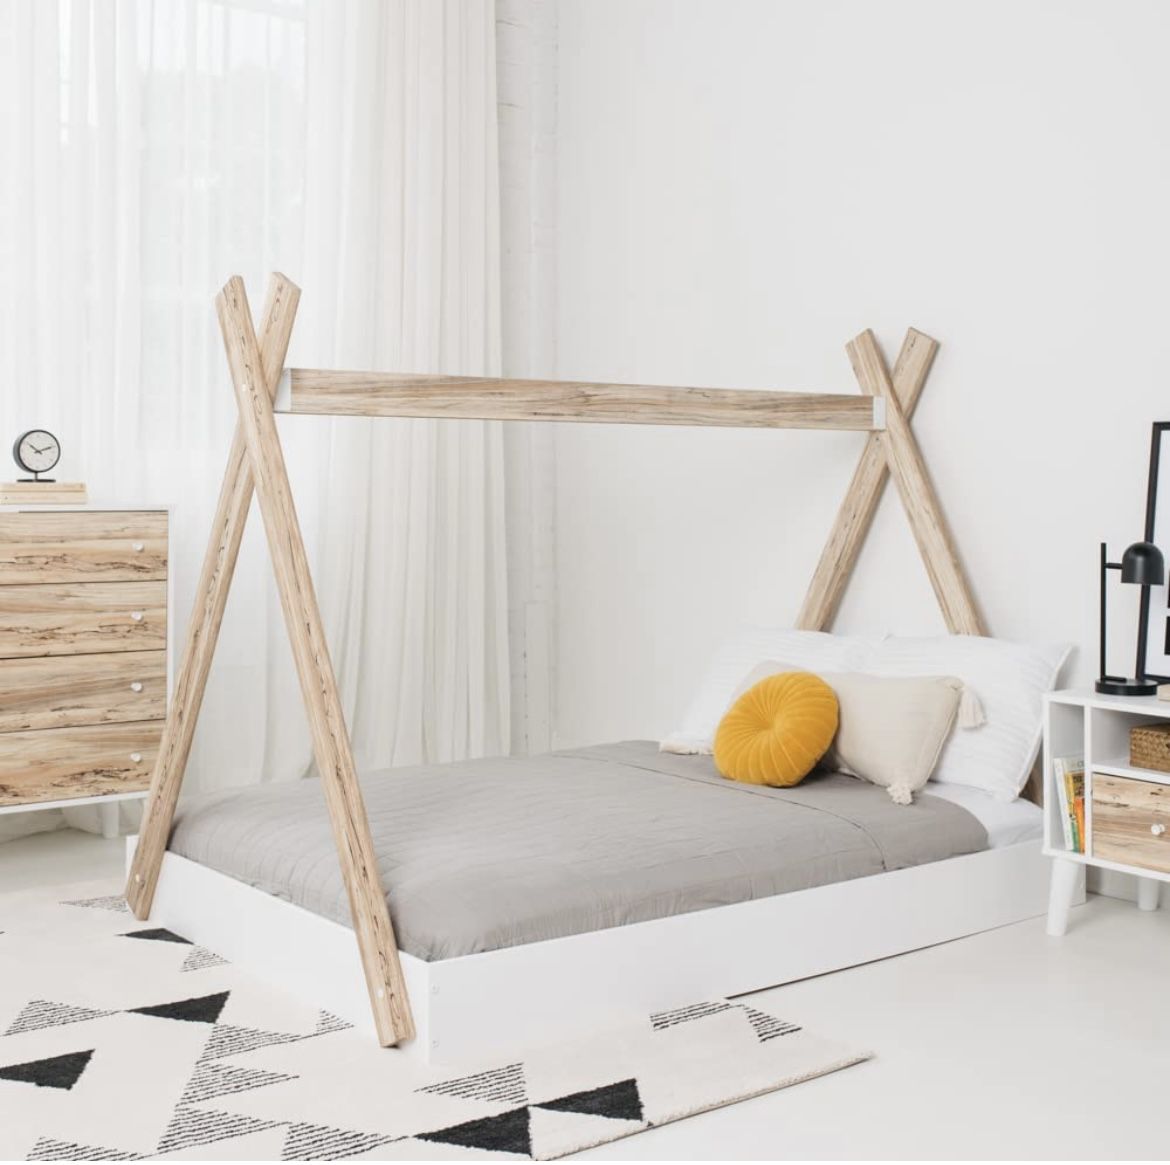 Signature Design by Ashley Piperton Tent Floor Bed Frame, Full, Natural Wood & White